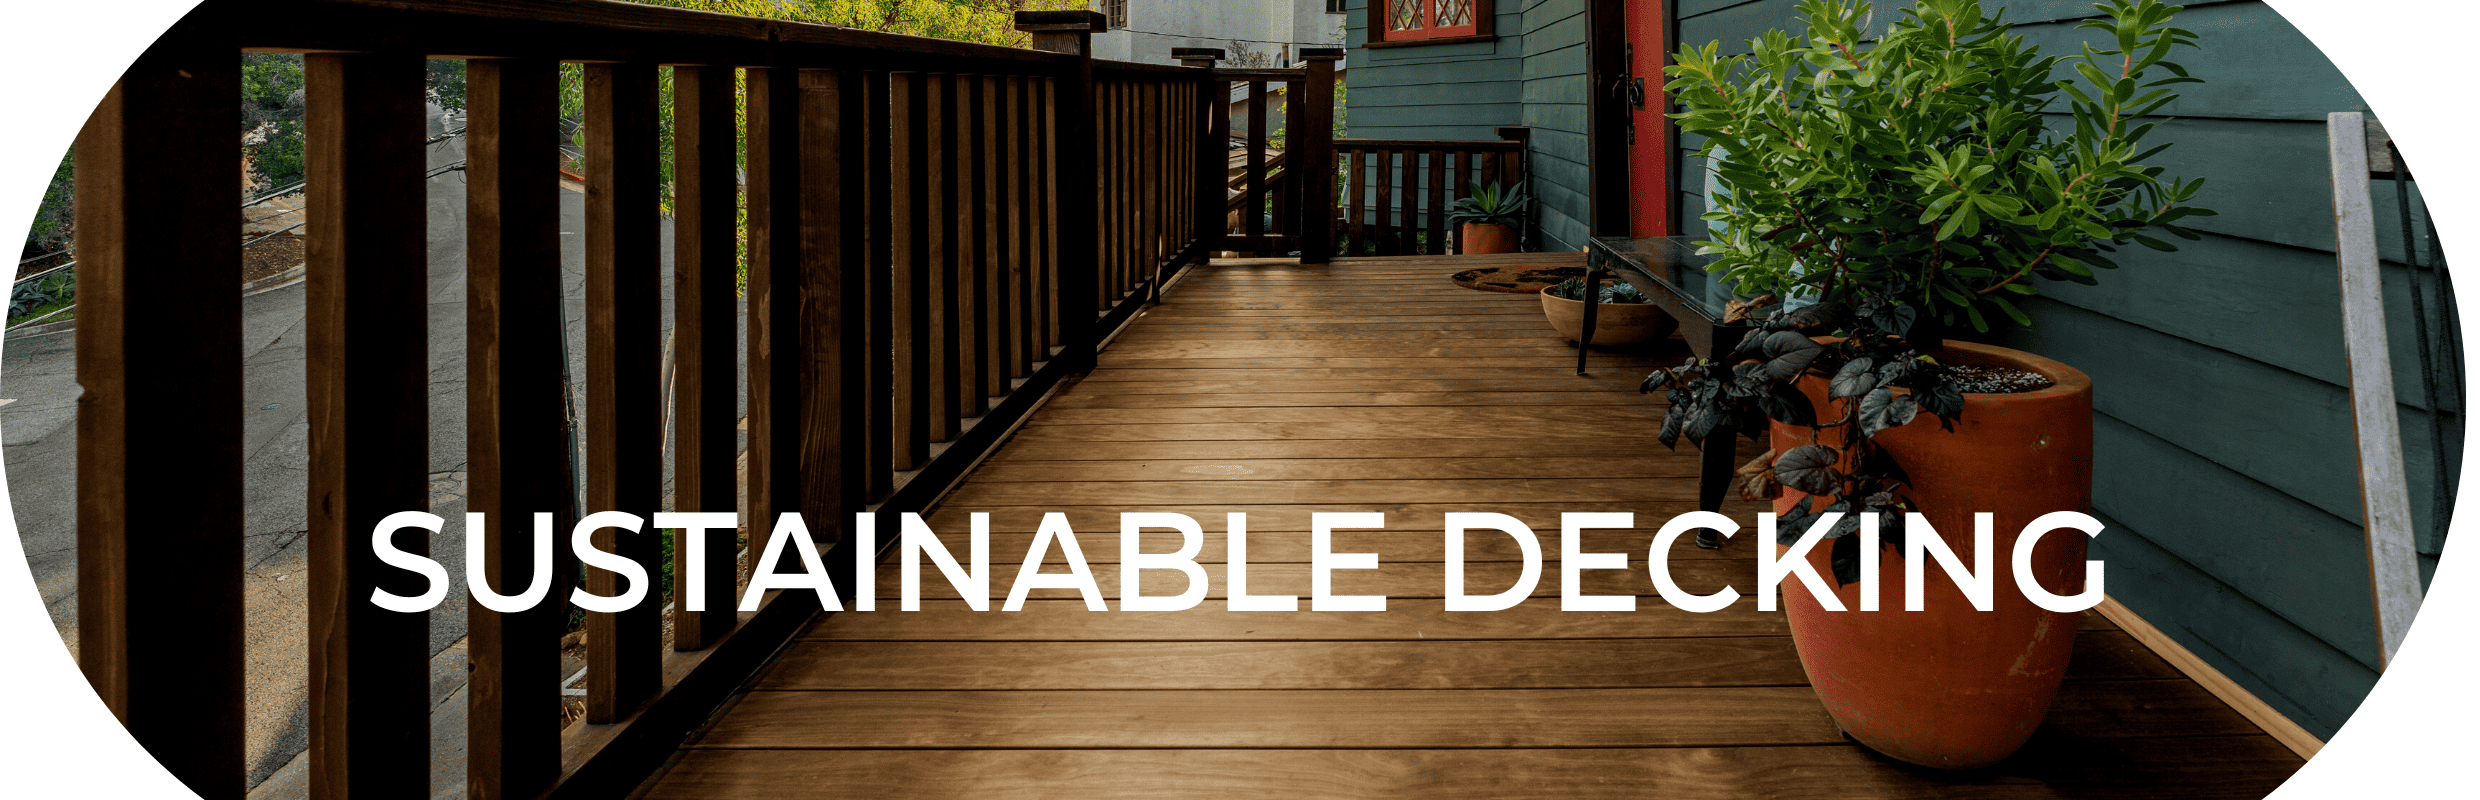 Image of a sustainable and healthy deck that spans the length of a teal colored home with a red door. The deck is made from Kebony Wood - a durable and beautiful modified wood decking.